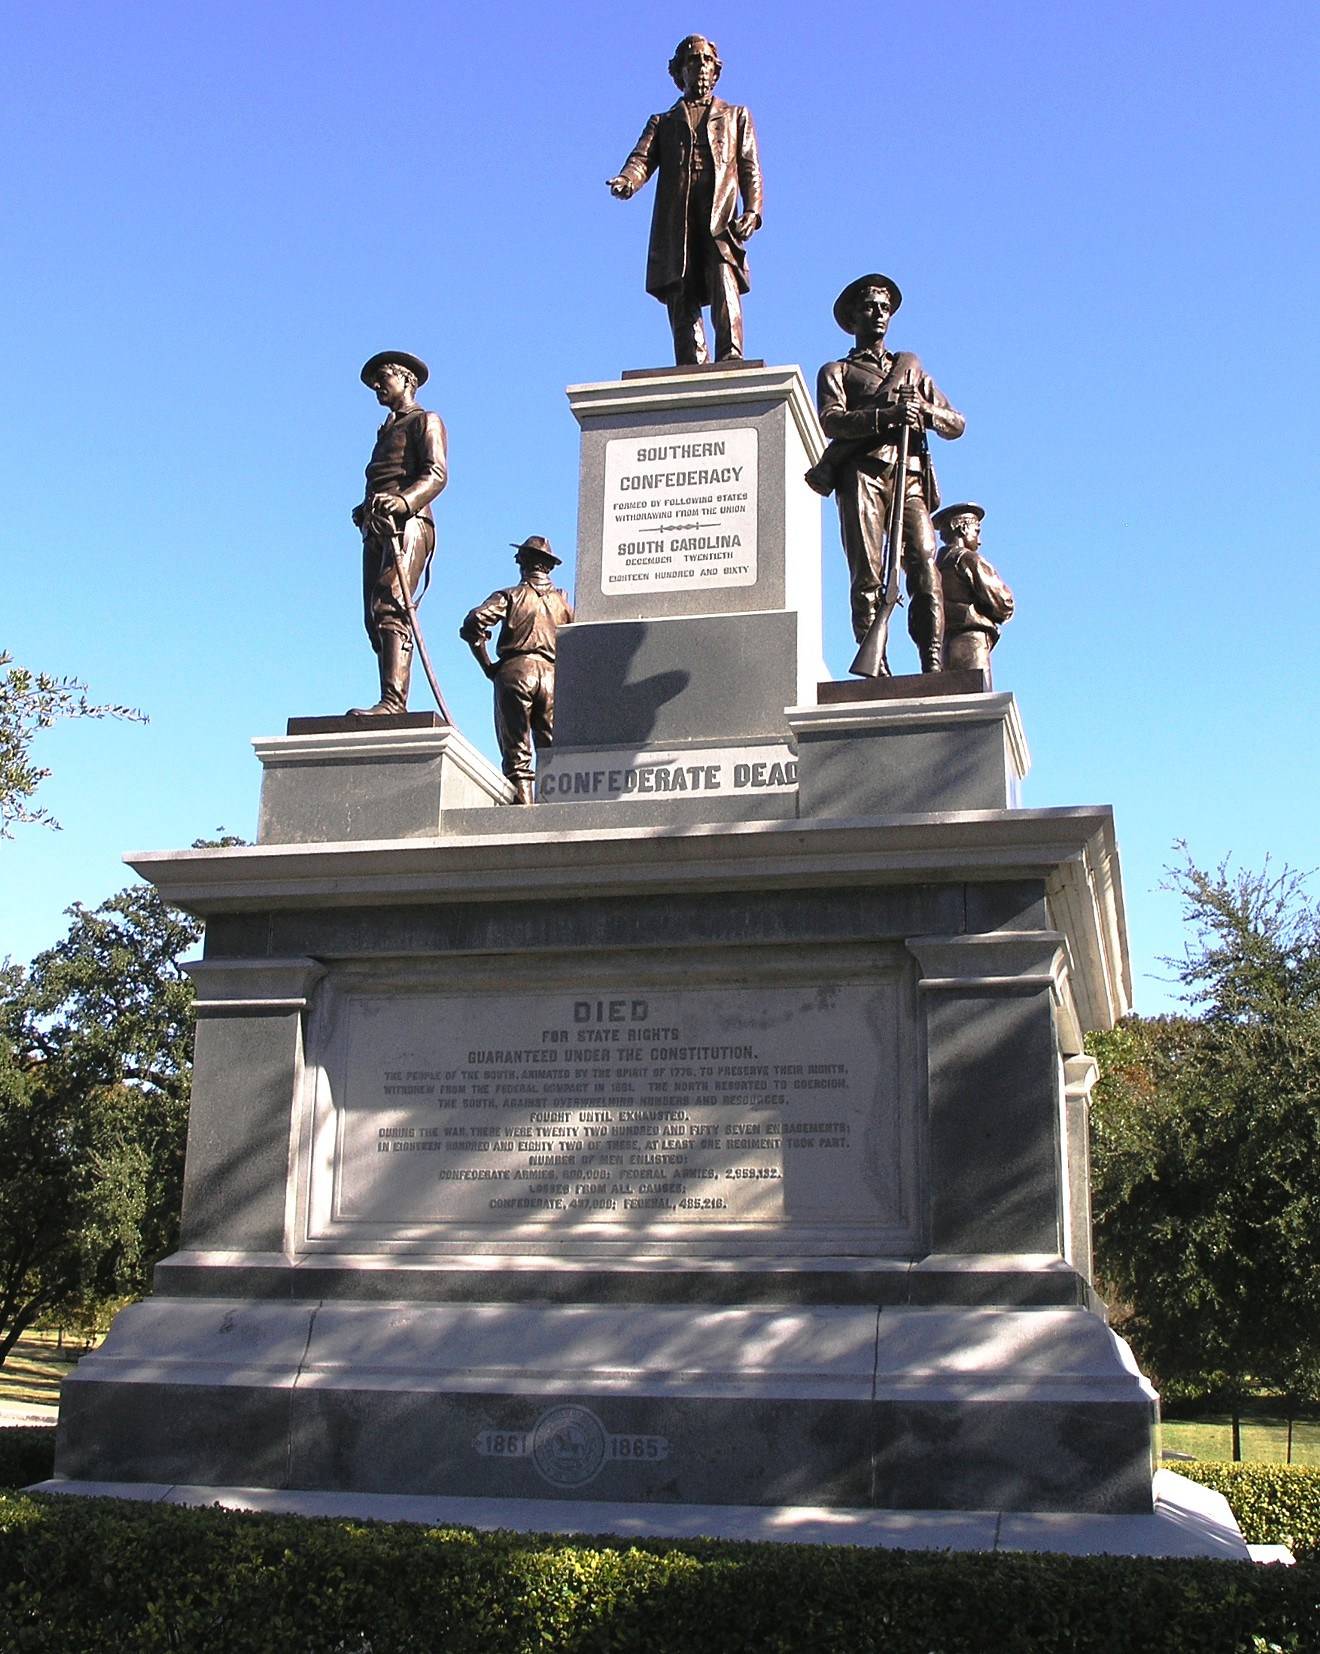 If Democratic state lawmakers are successful, Confederate memorials like this one will soon be removed from the Capitol's grounds.